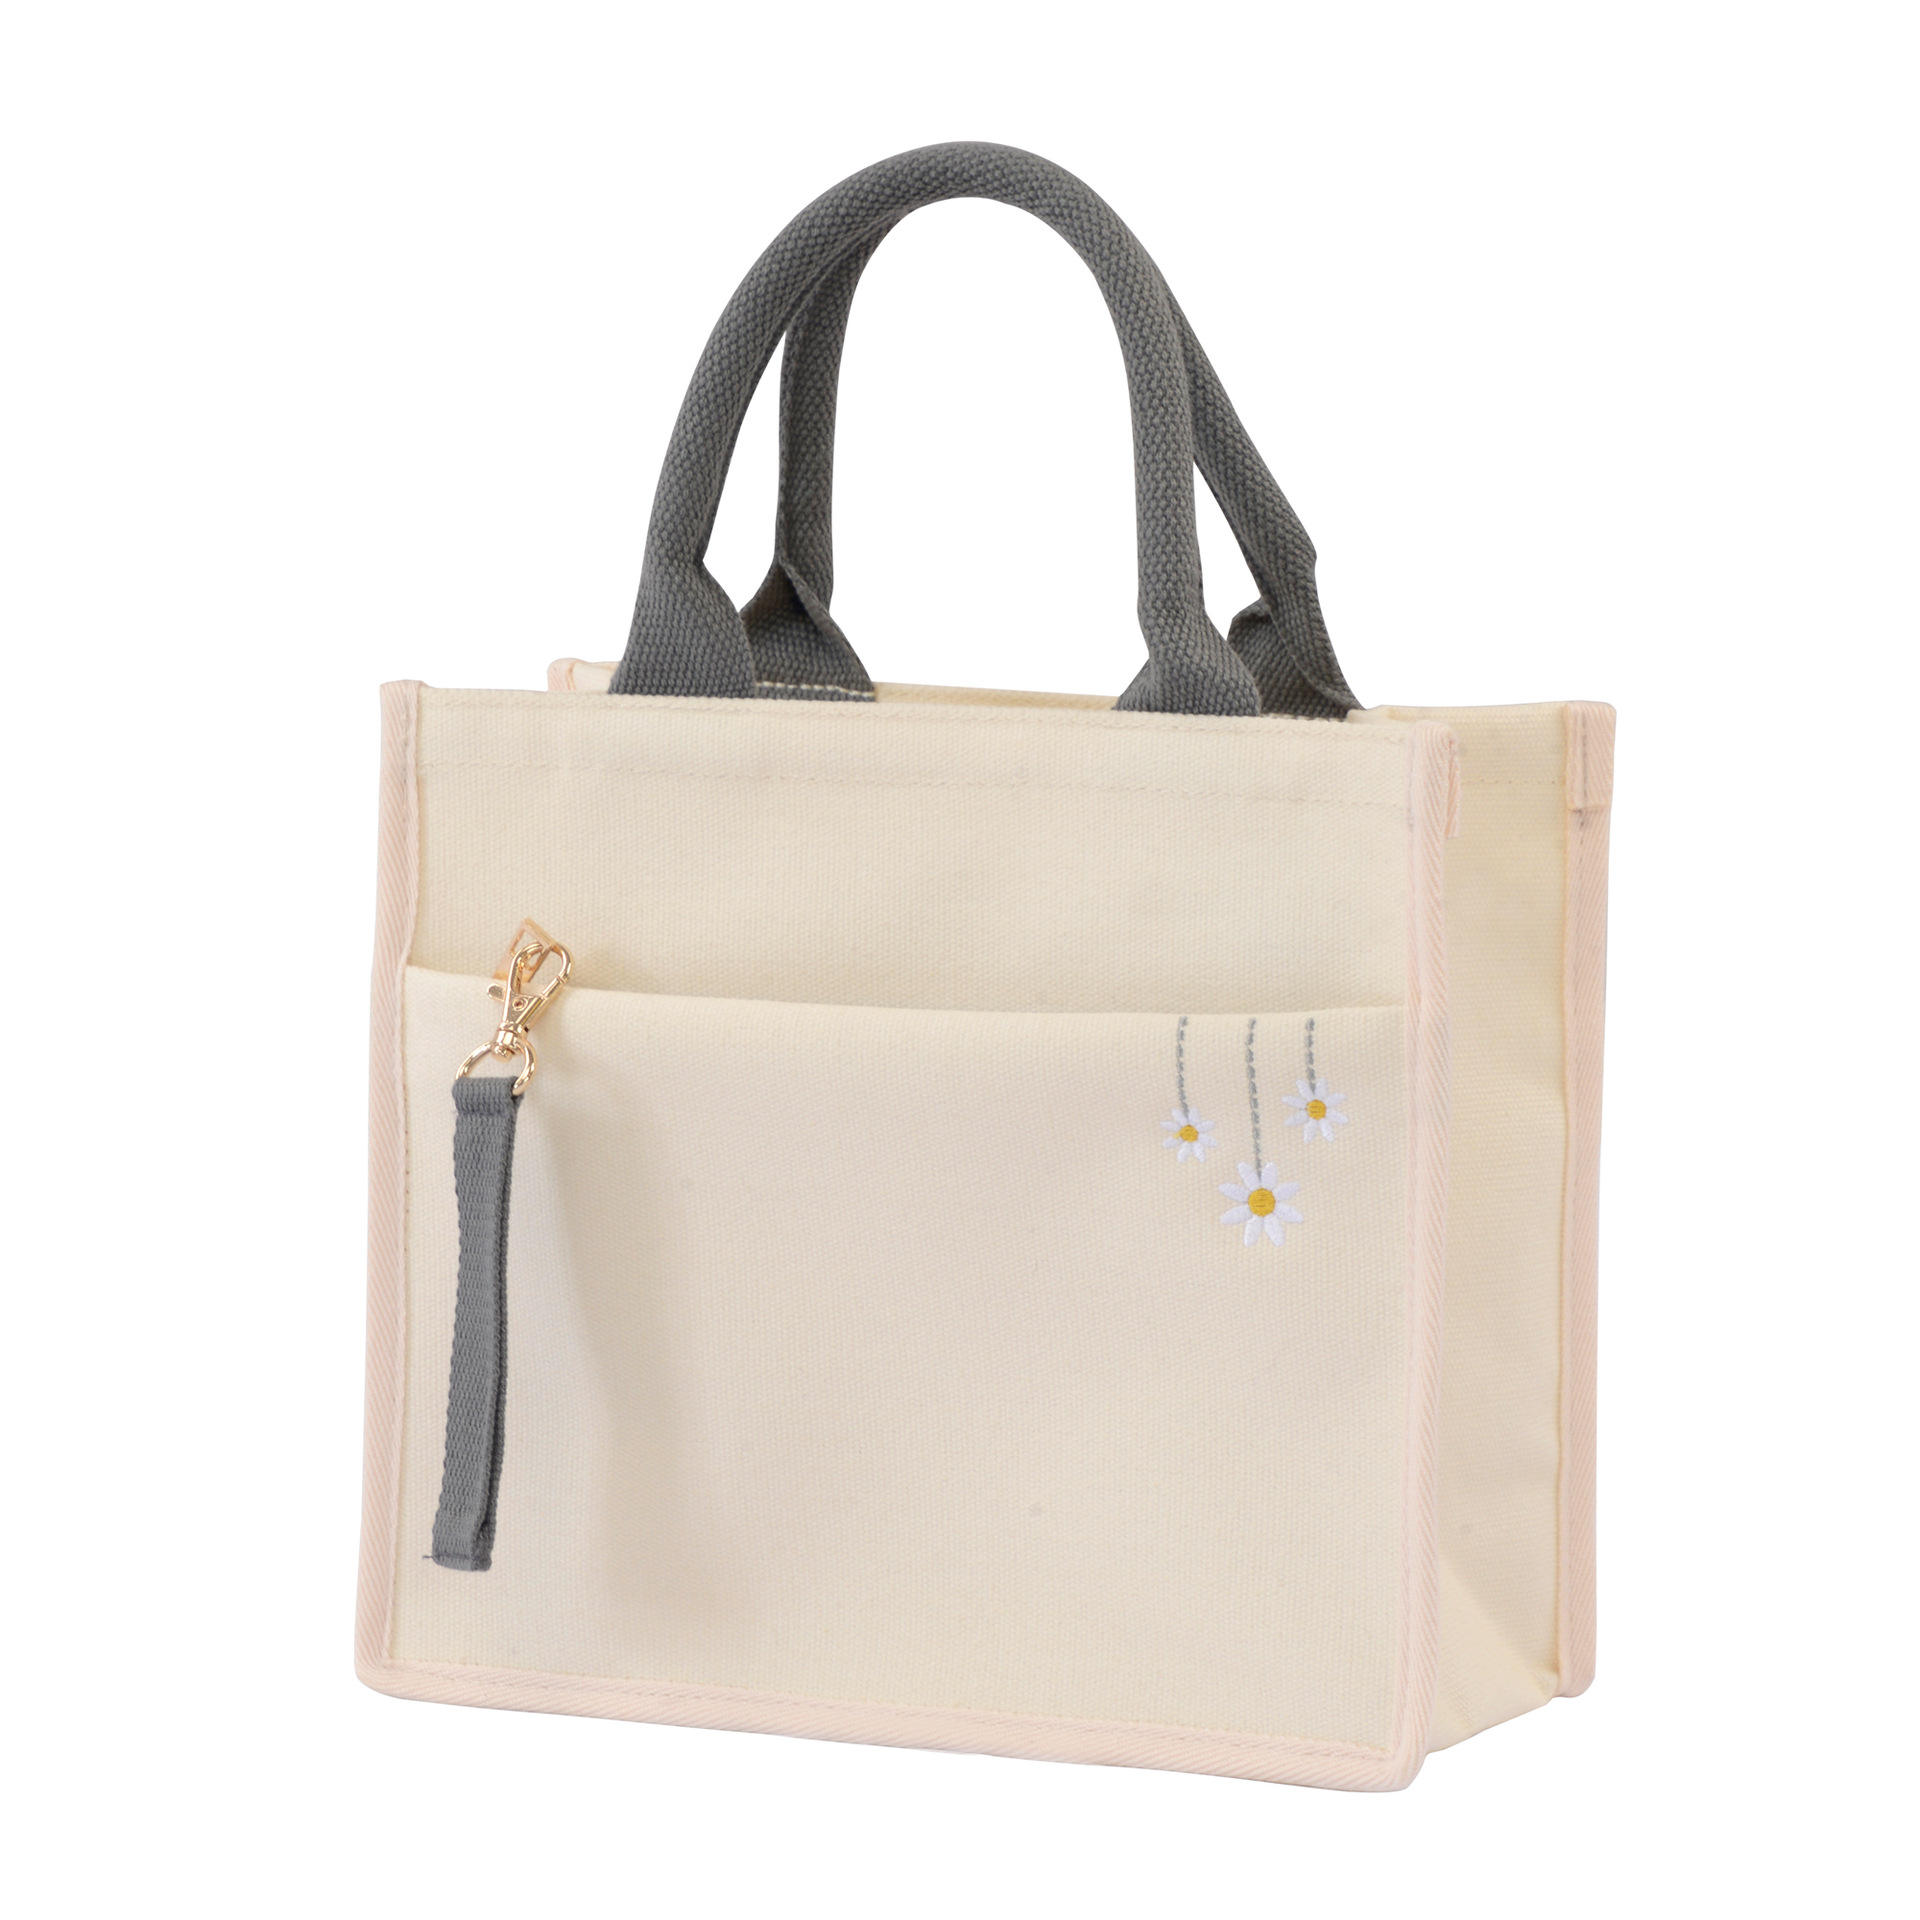 Amazon's Hot Sales Promotion New Canvas Tote Bag Embroidered Style Shopping Bag